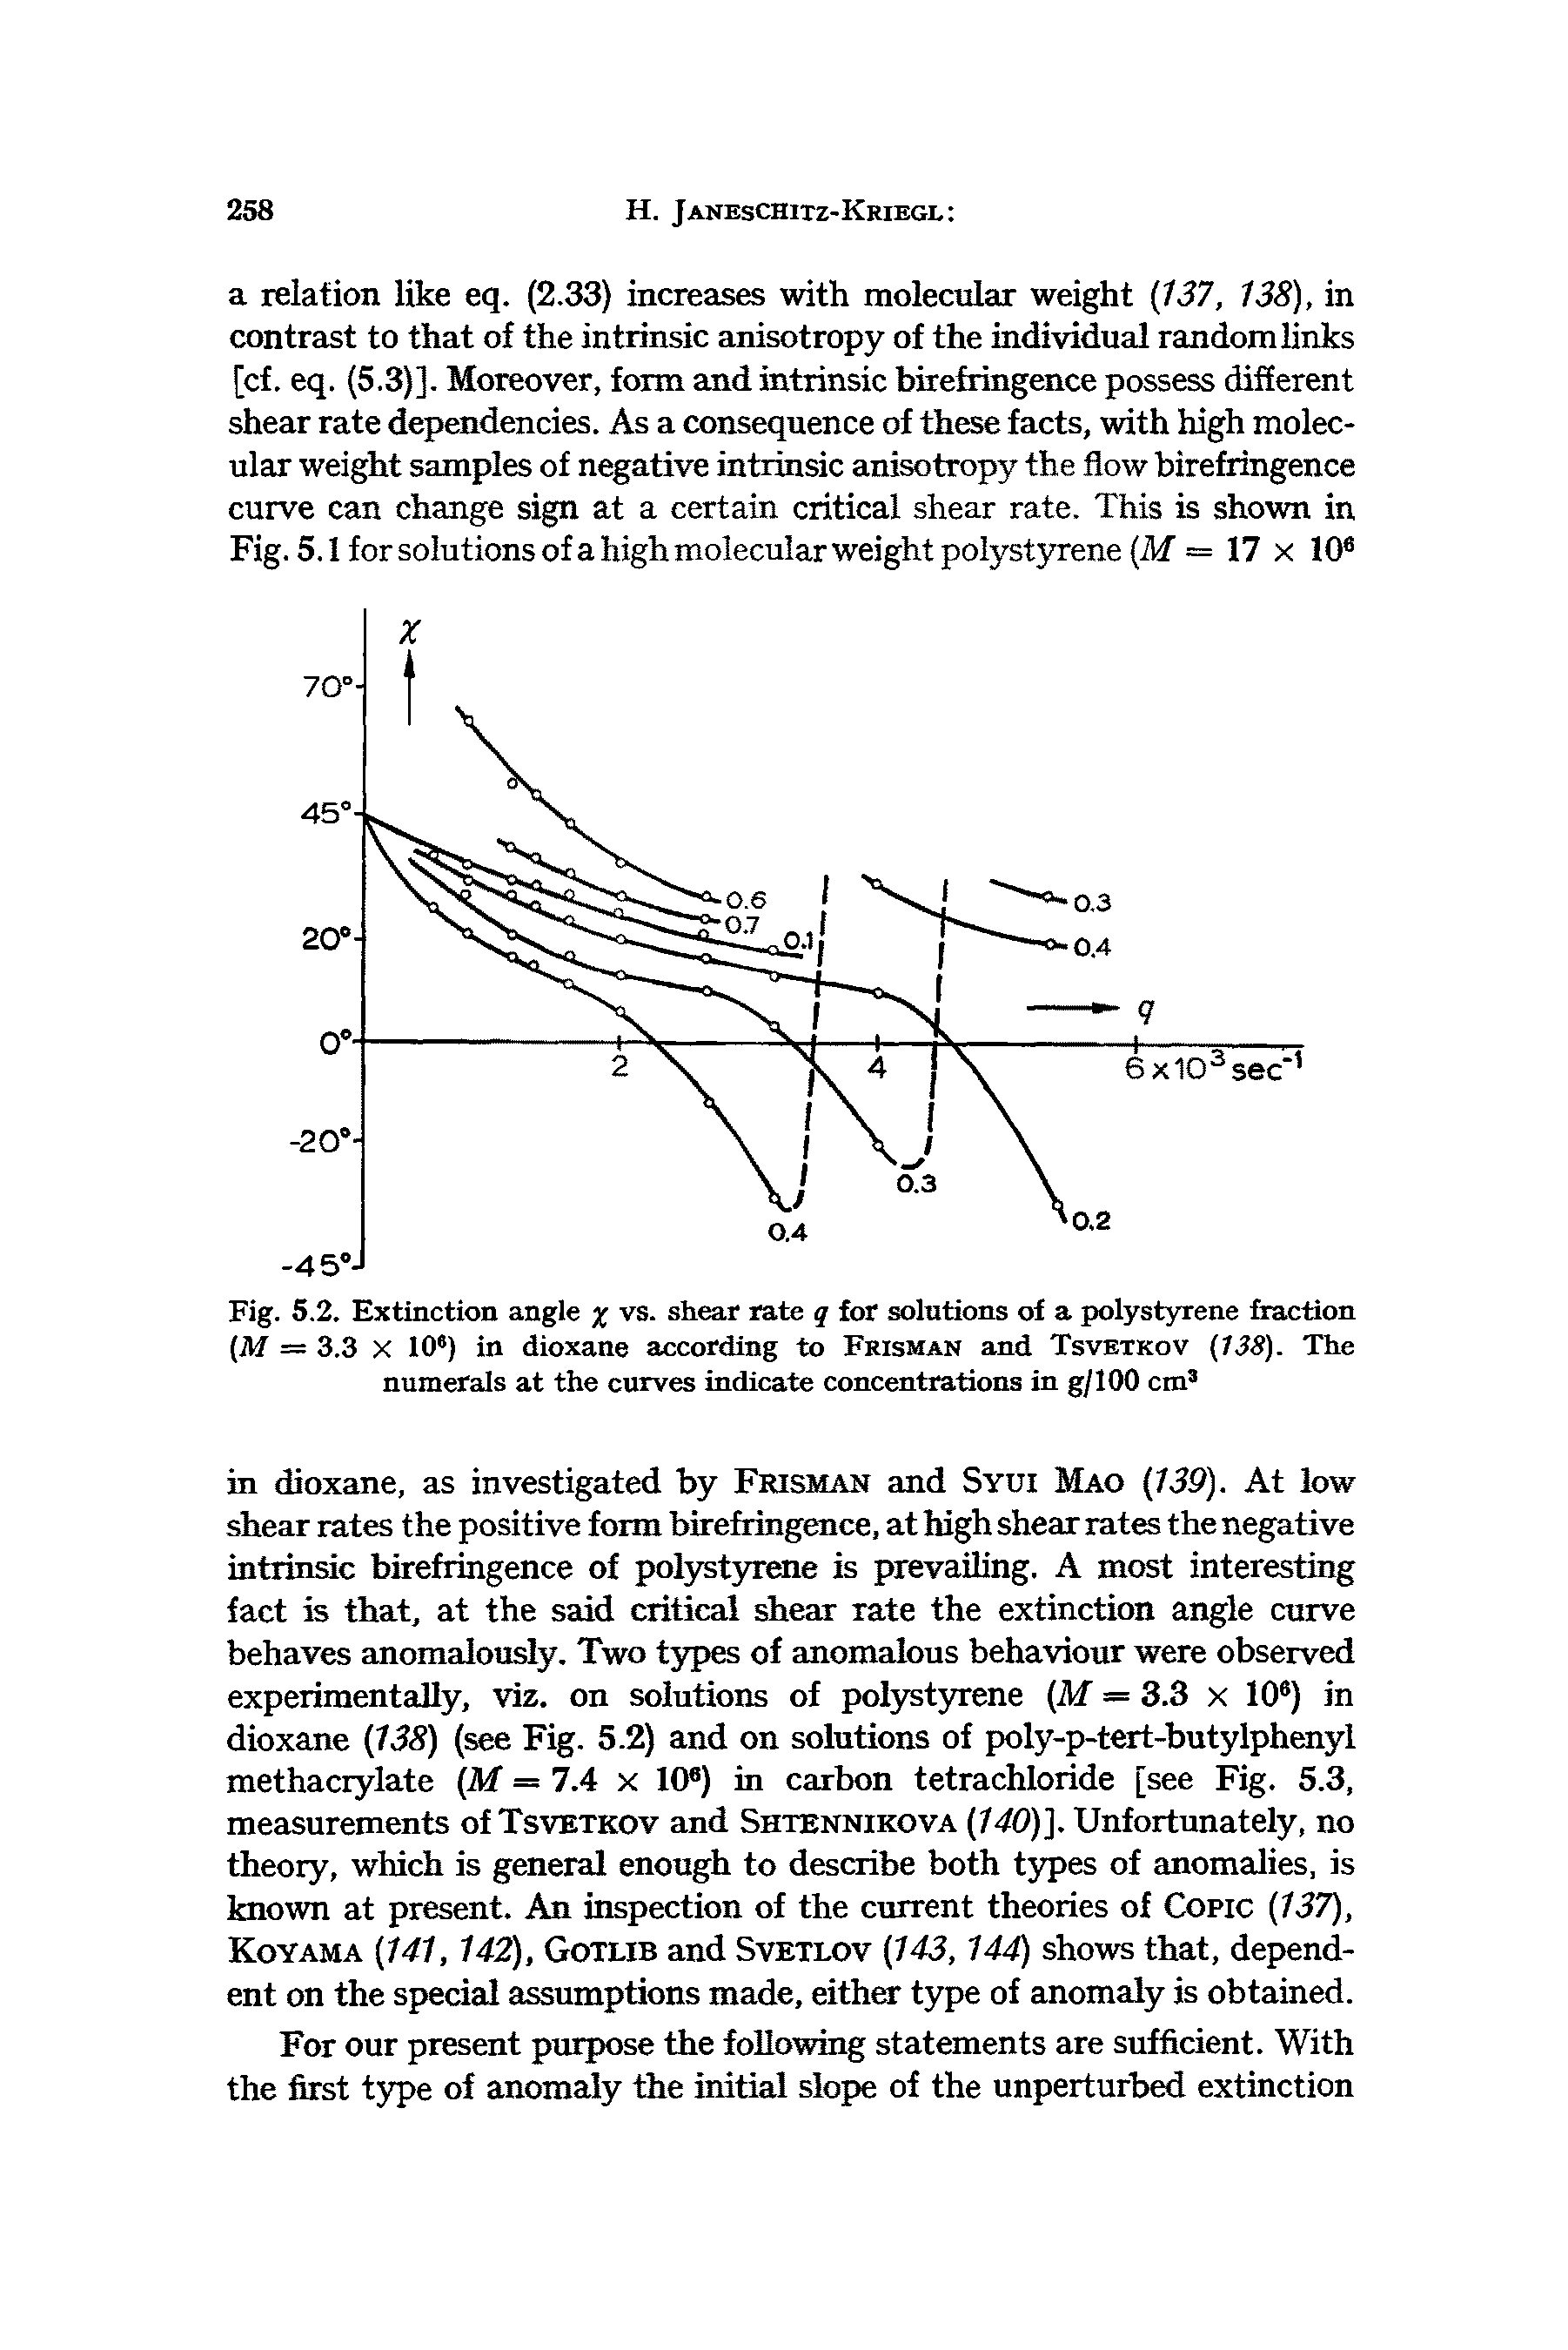 Fig. 5.2. Extinction angle x vs. shear rate q for solutions of a polystyrene fraction (M = 3.3 X 10°) in dioxane according to Frisman and Tsvetkov (138). The numerals at the curves indicate concentrations in g/100 cm3...